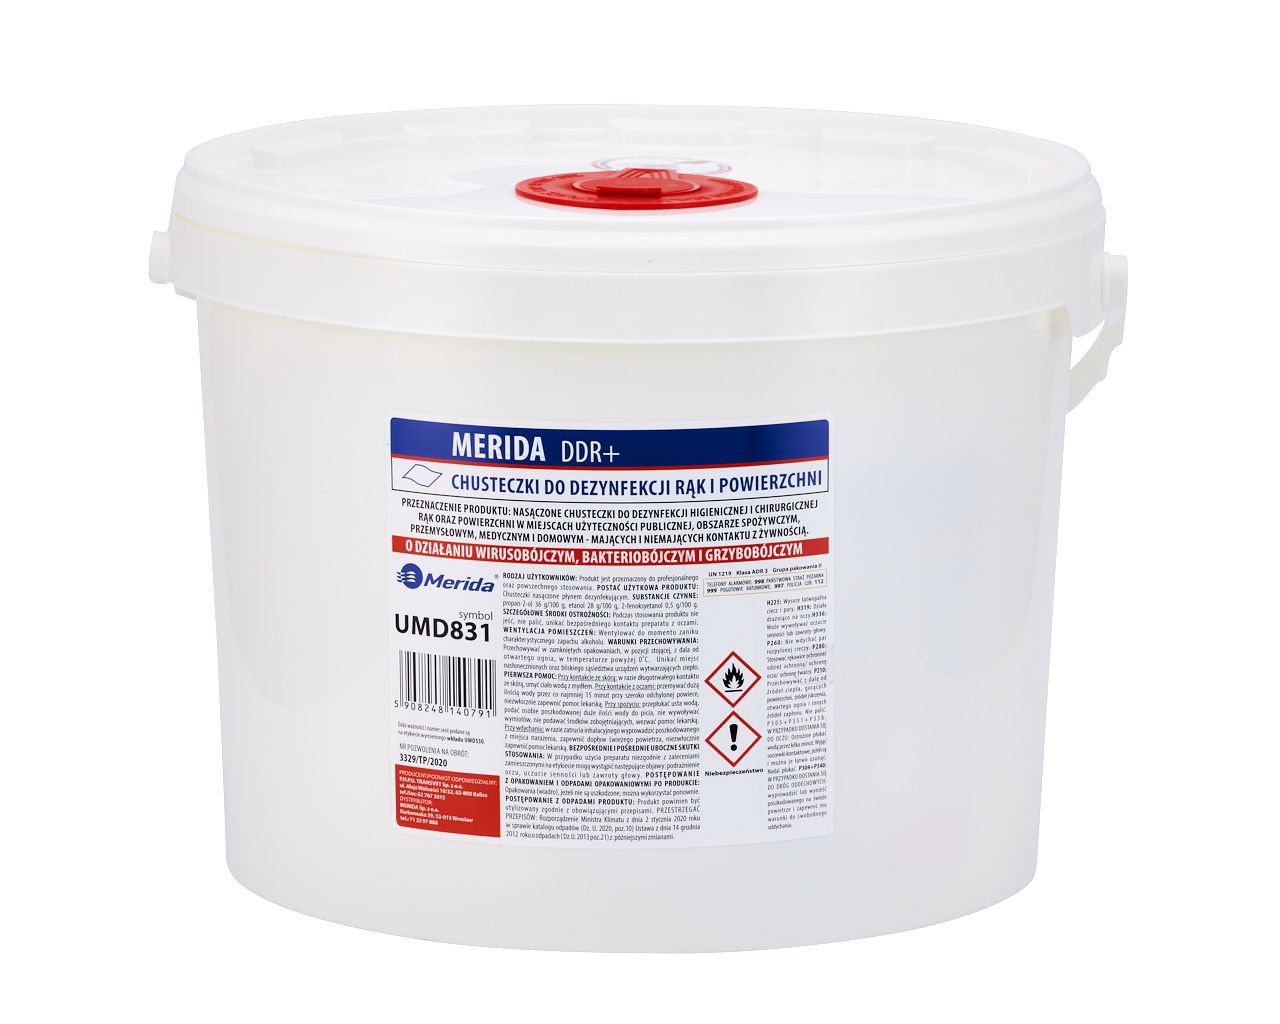 MERIDA DDR+ hand and surface disinfecting wipes, bucket 10 l, roll 122.36 m, 322 sheets